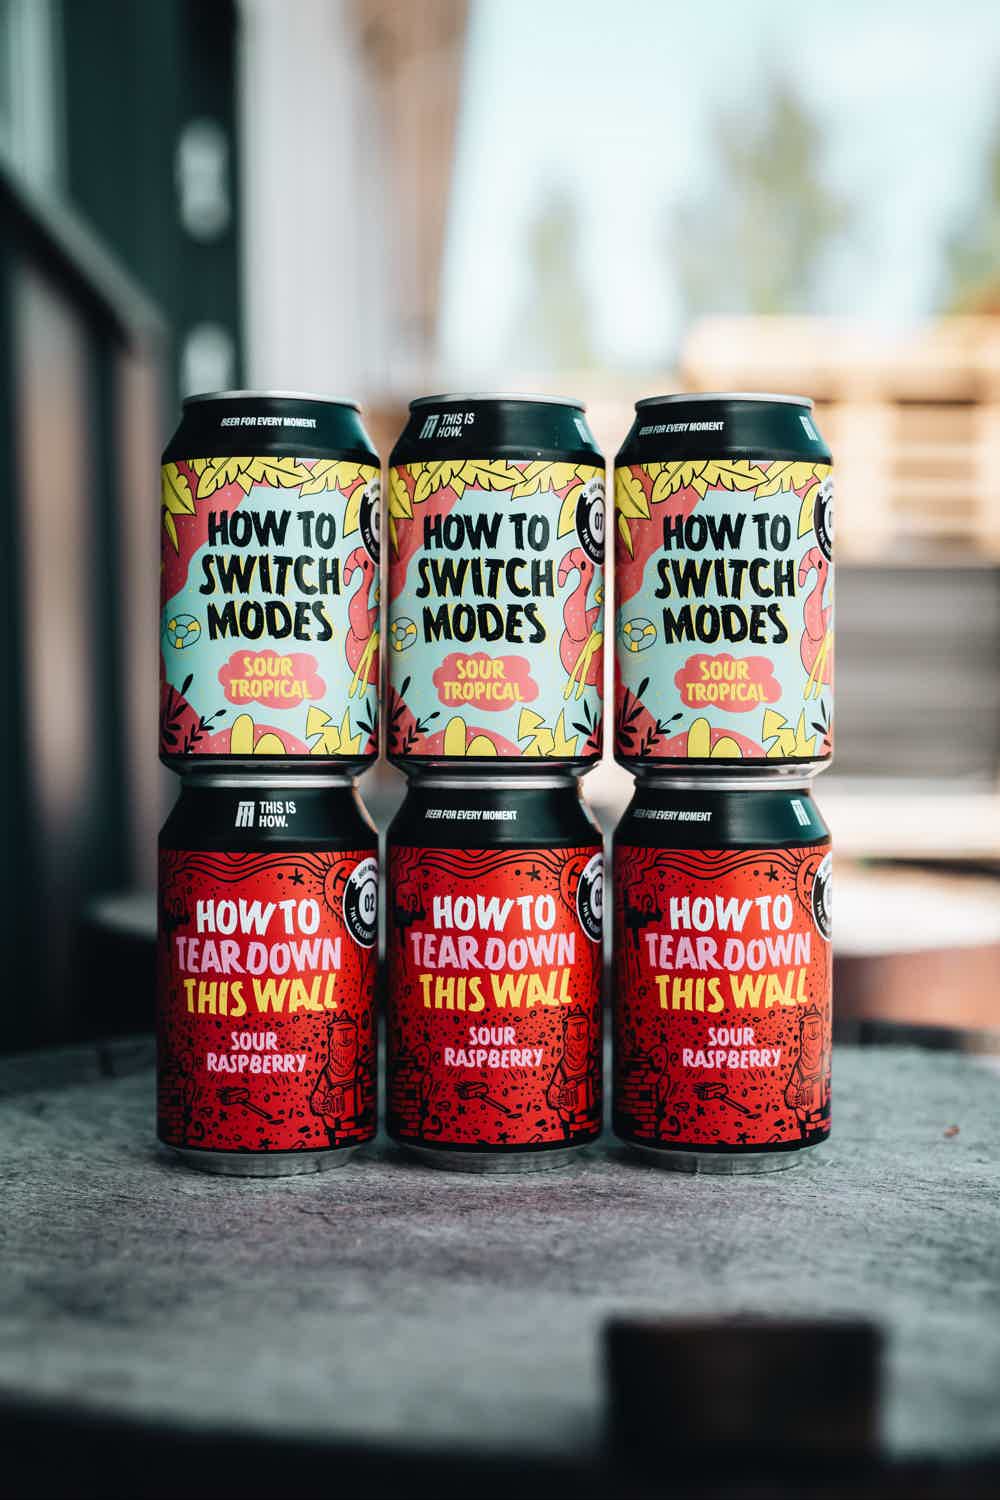 Sour Bundle: How to teardown this wall - Sour raspberry, How to switch modes - Sour Tropical